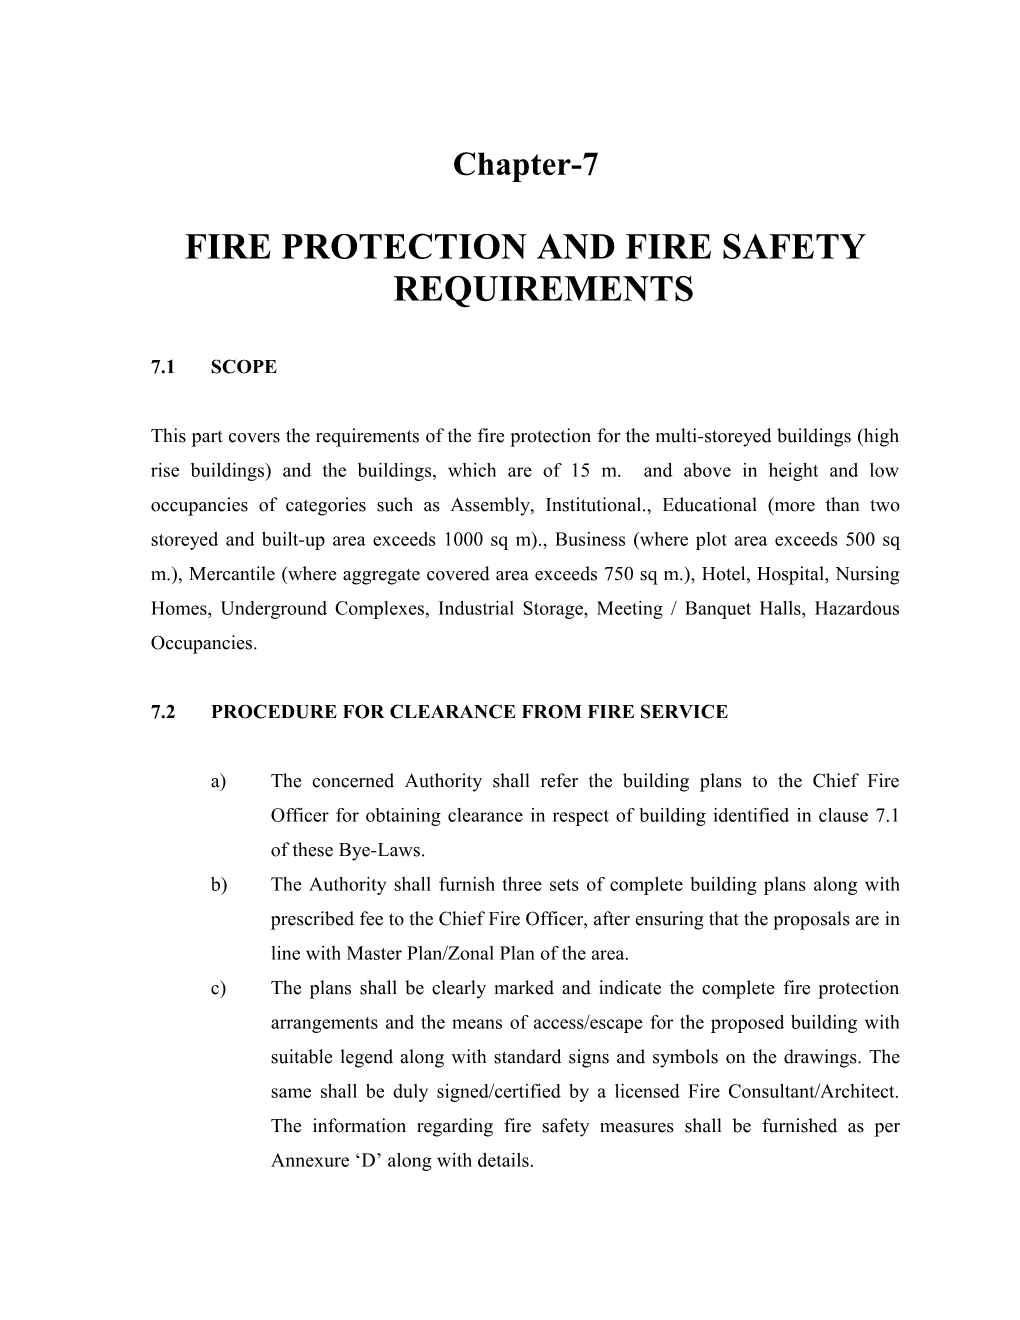 Chapter-7 Fire Protection and Fire Safety Requirements